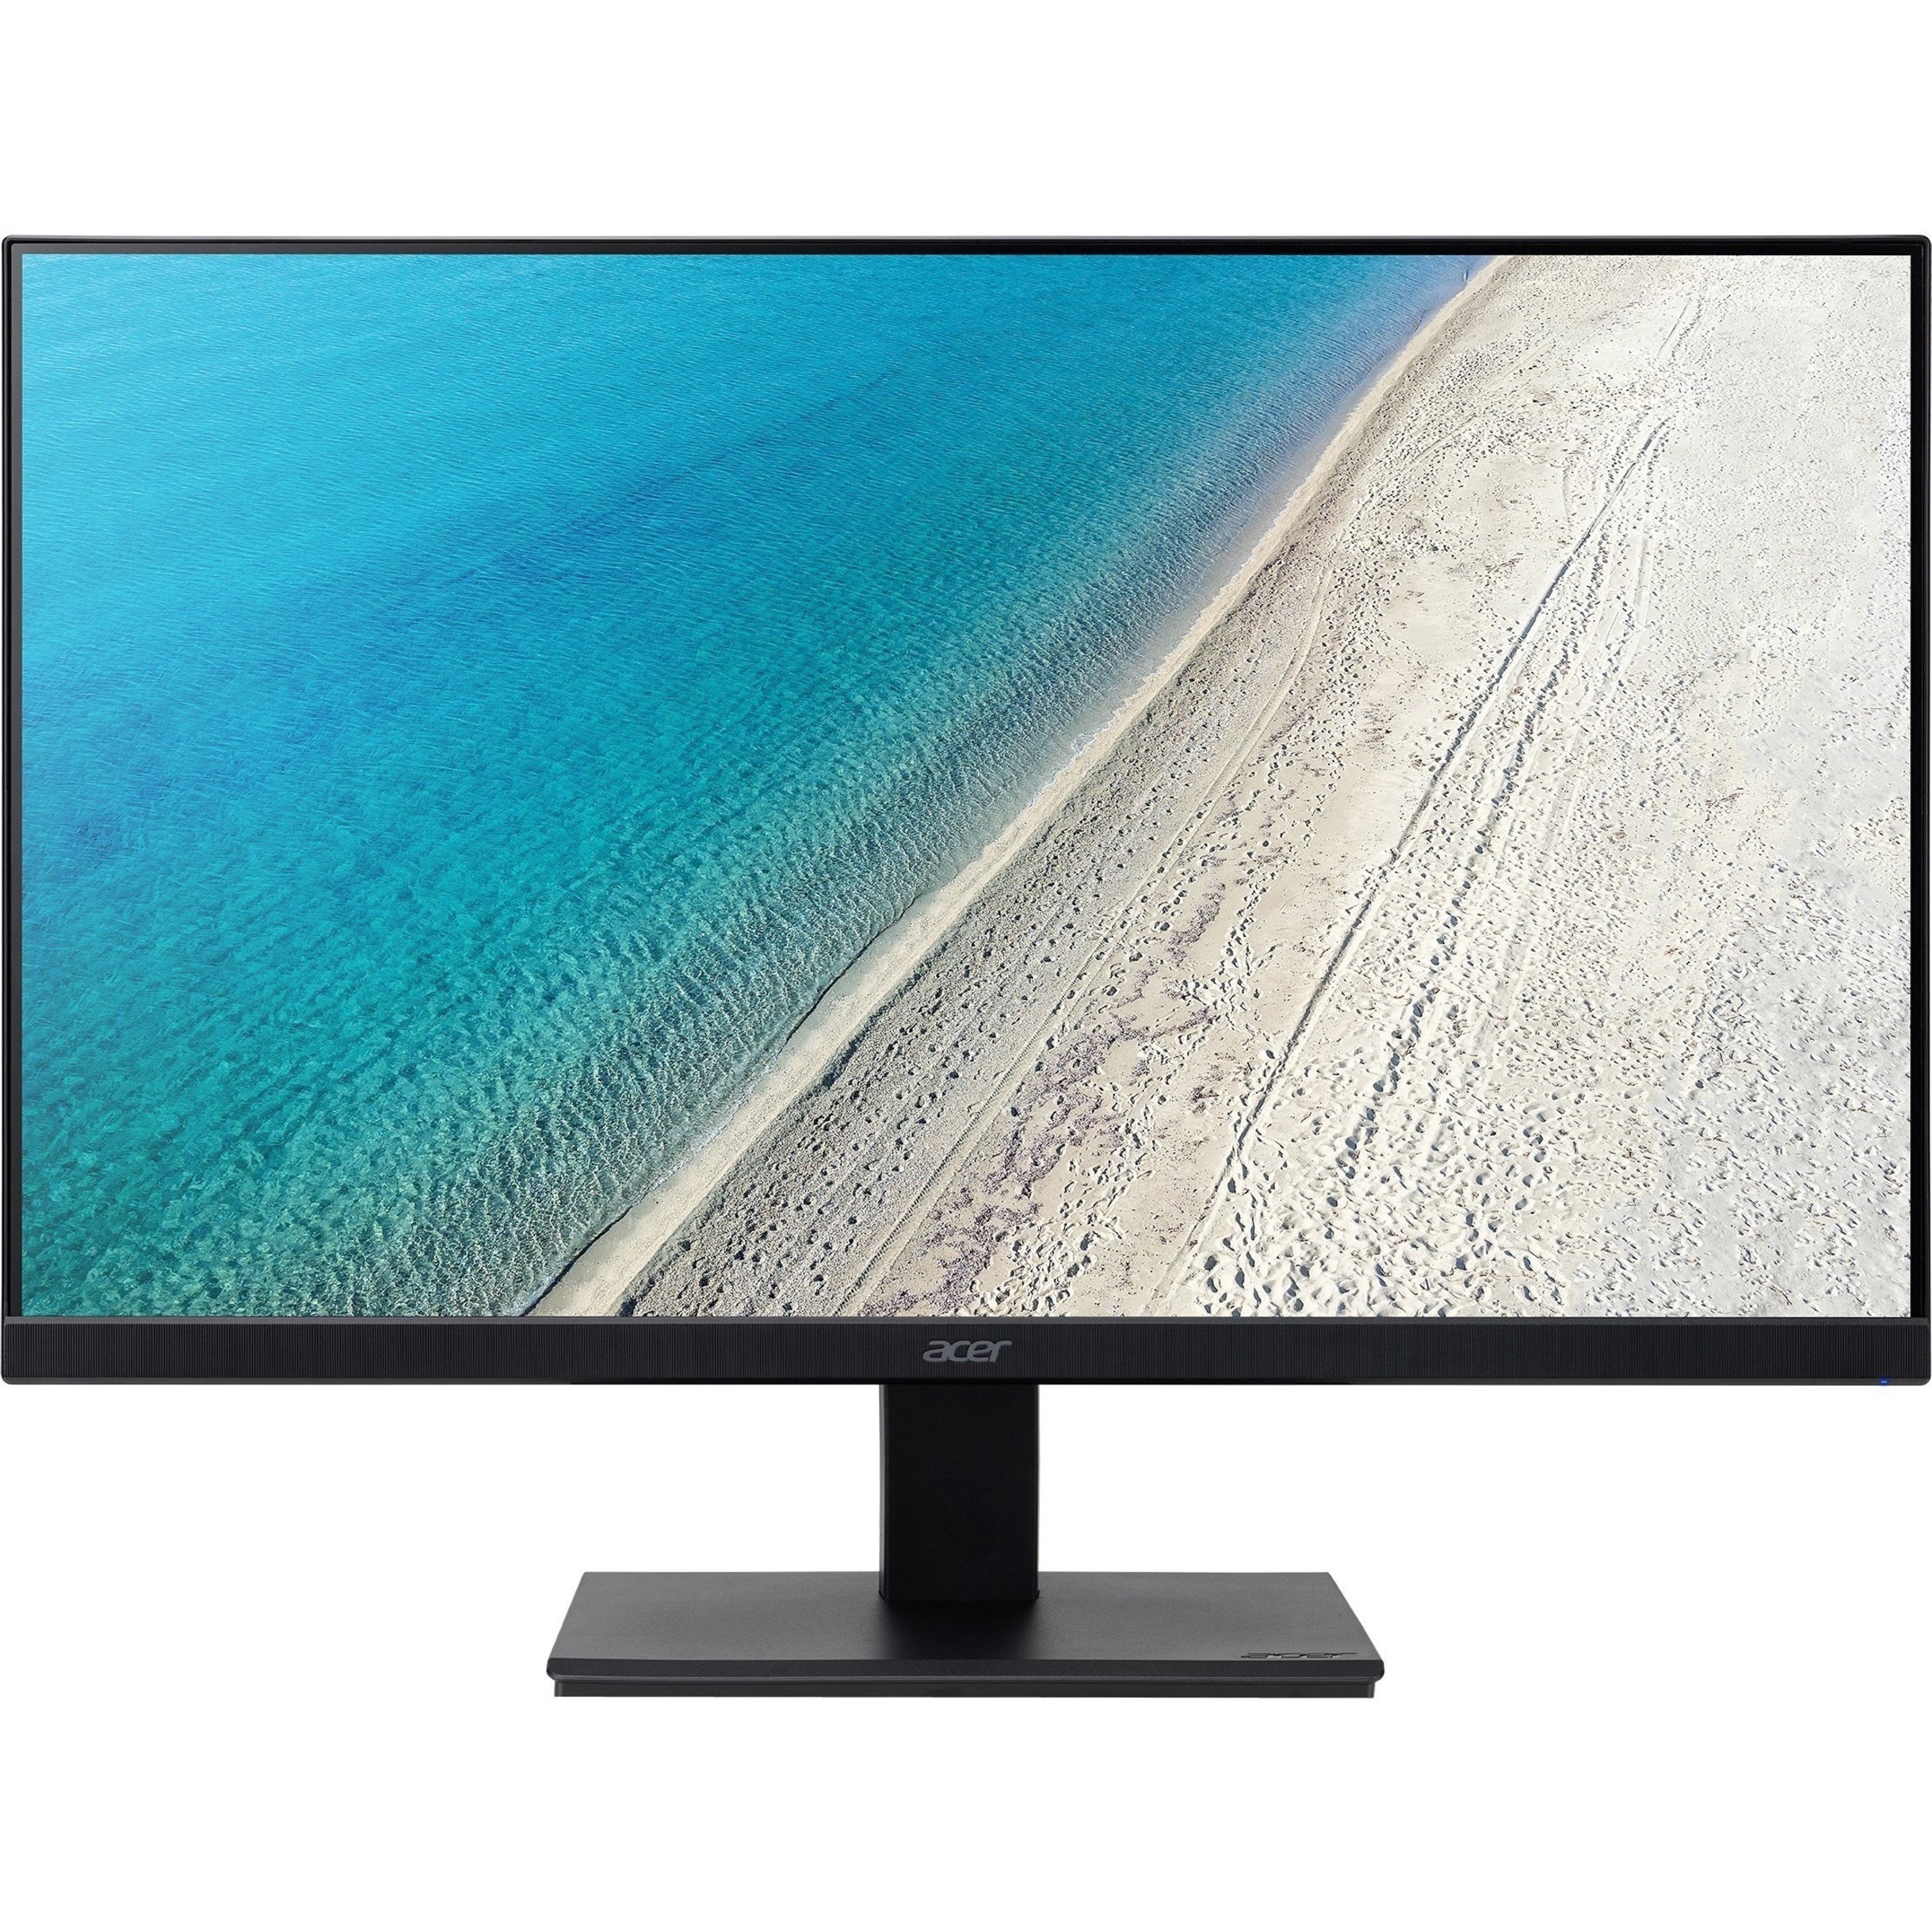 Acer V247Y A Full HD LCD Monitor, 16:9, Black - image 4 of 7